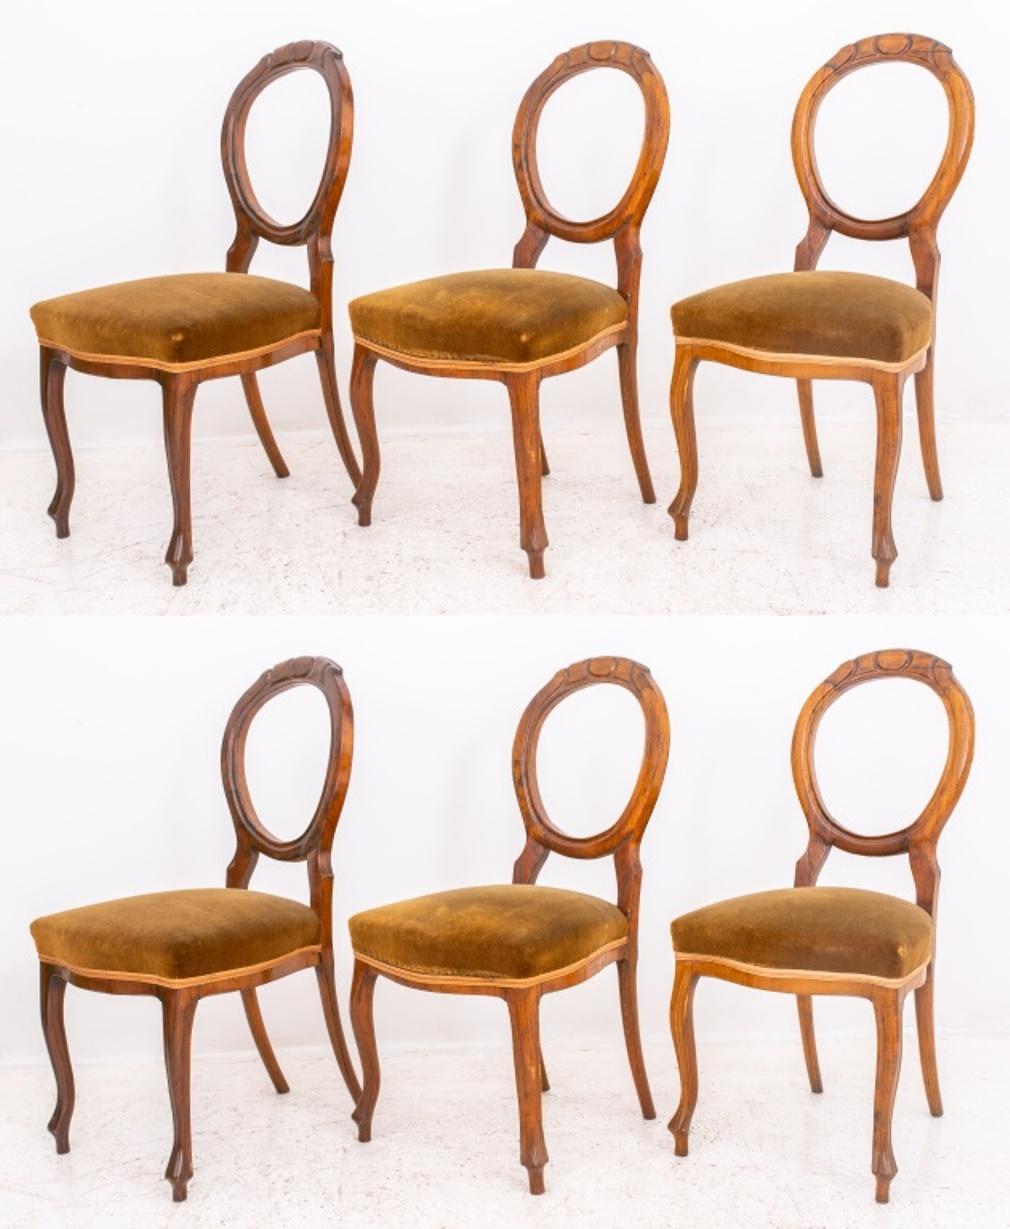 Group of six English Victorian carved cherry wood chair, open back, tapered cabriole legs, seat upholstered in brown velvet, circa late 19th century.

Dimensions: 37